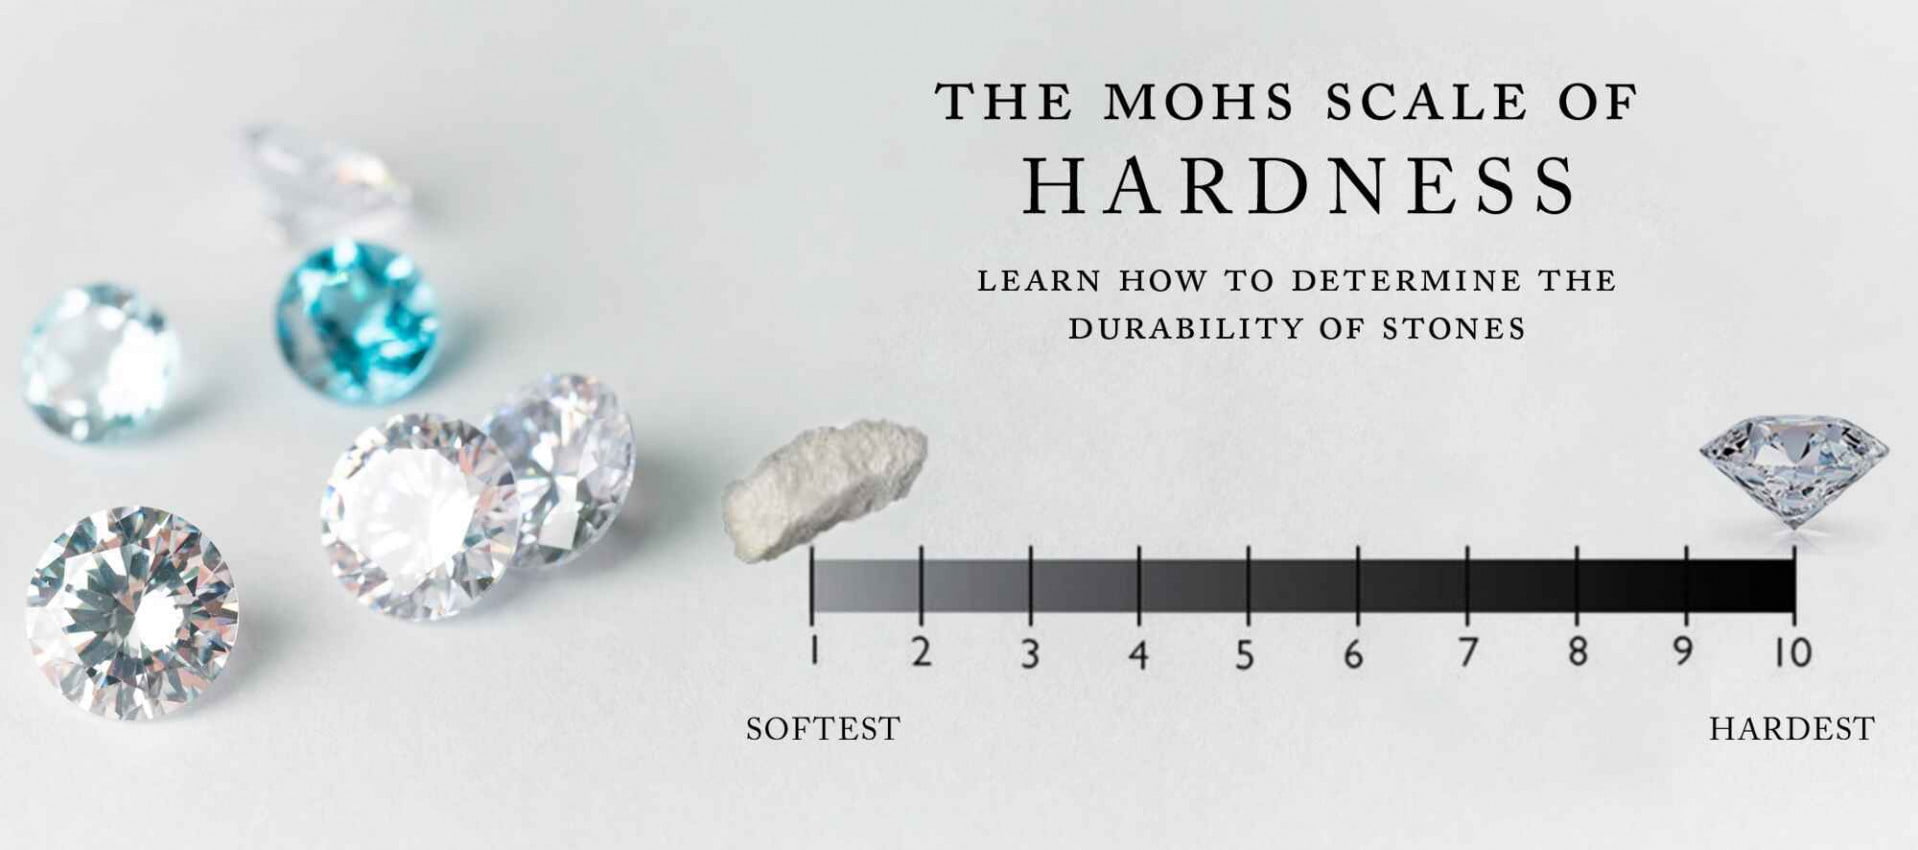 What Is The Hardness Of Granite? Understanding Granite Hardness on the Mohs Scale